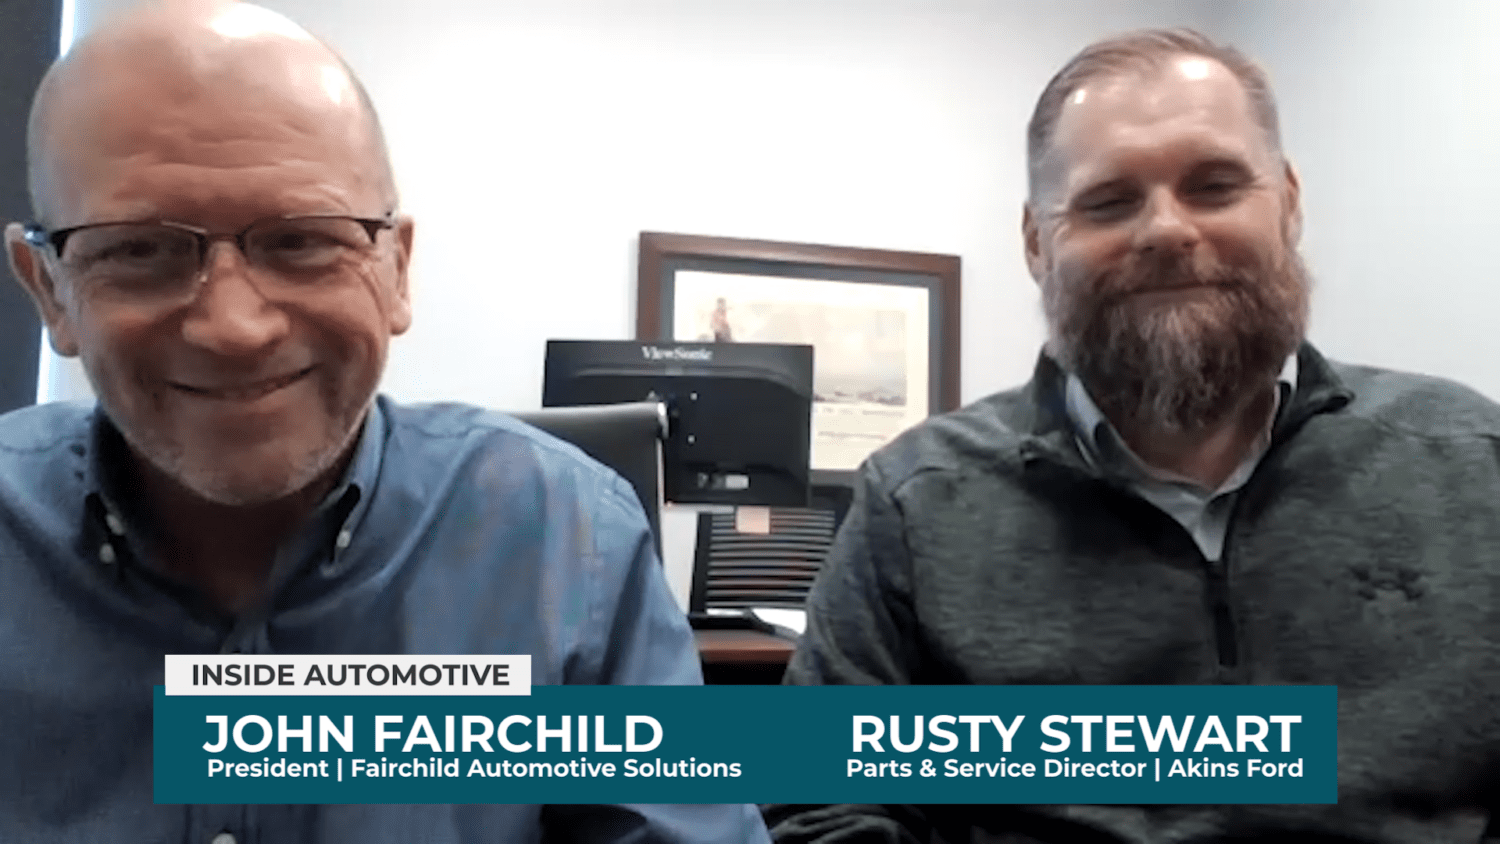 John Fairchild and Rusty Stewart join Inside Automotive to discuss the ongoing technicians shortage and simple hiring solutions for dealers.